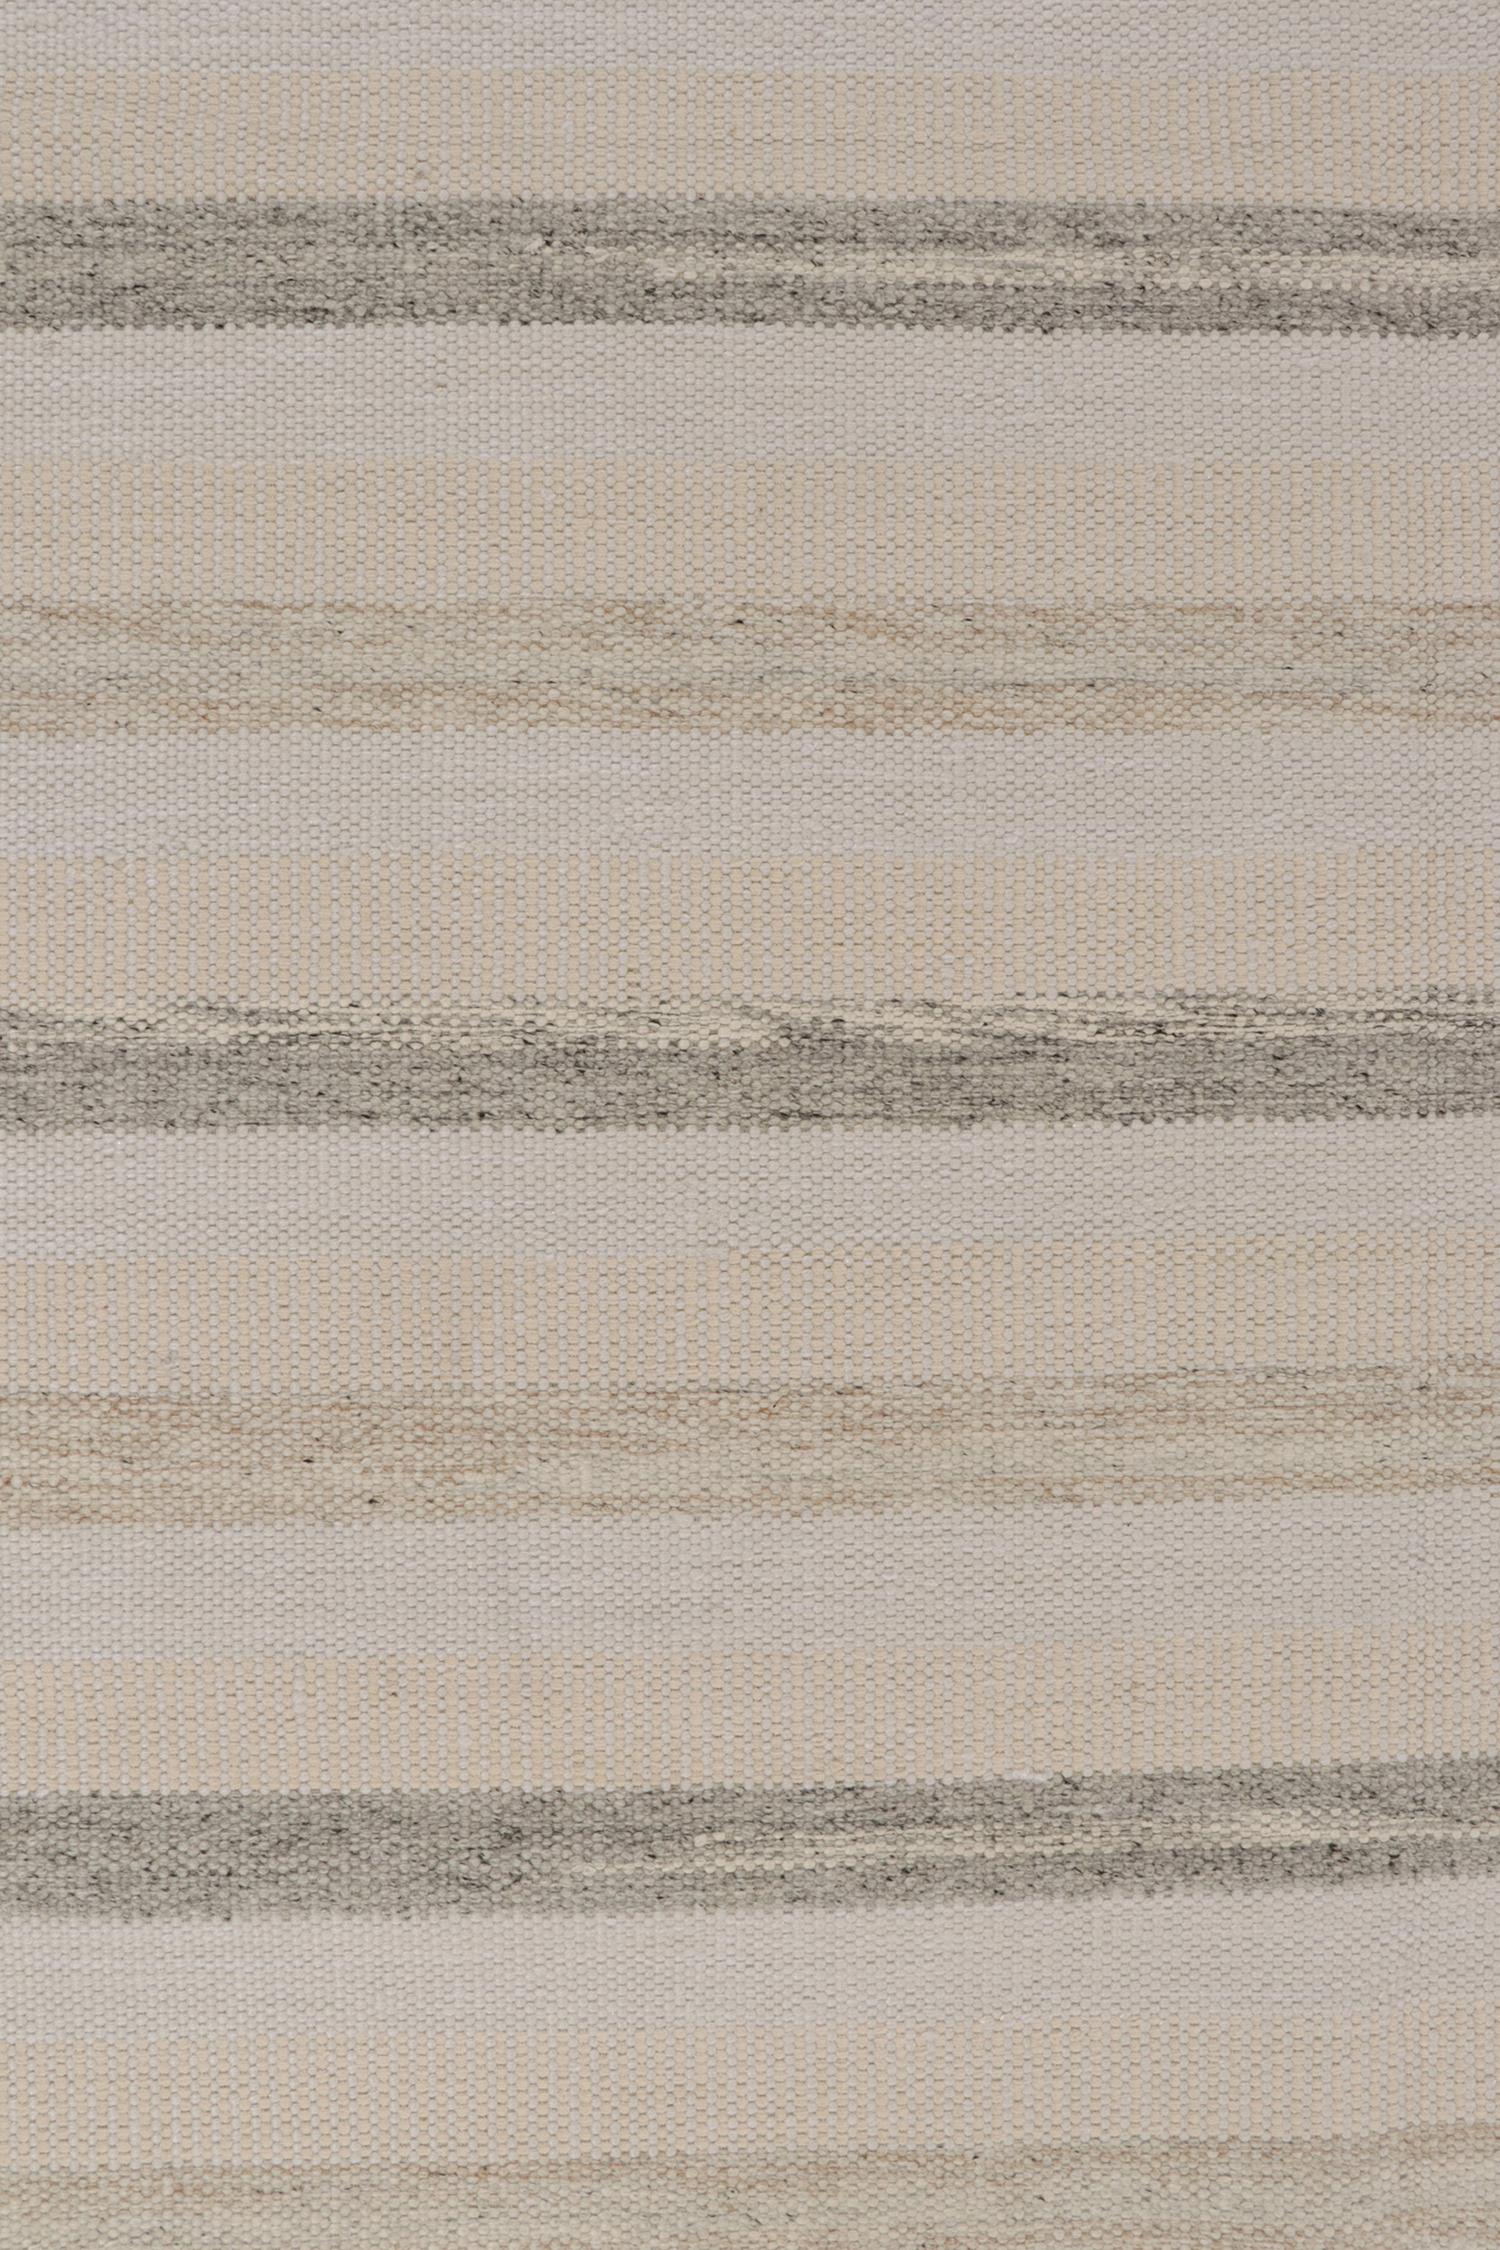 Rug & Kilim’s Scandinavian Style Kilim in White, Beige and Gray Stripes In New Condition For Sale In Long Island City, NY